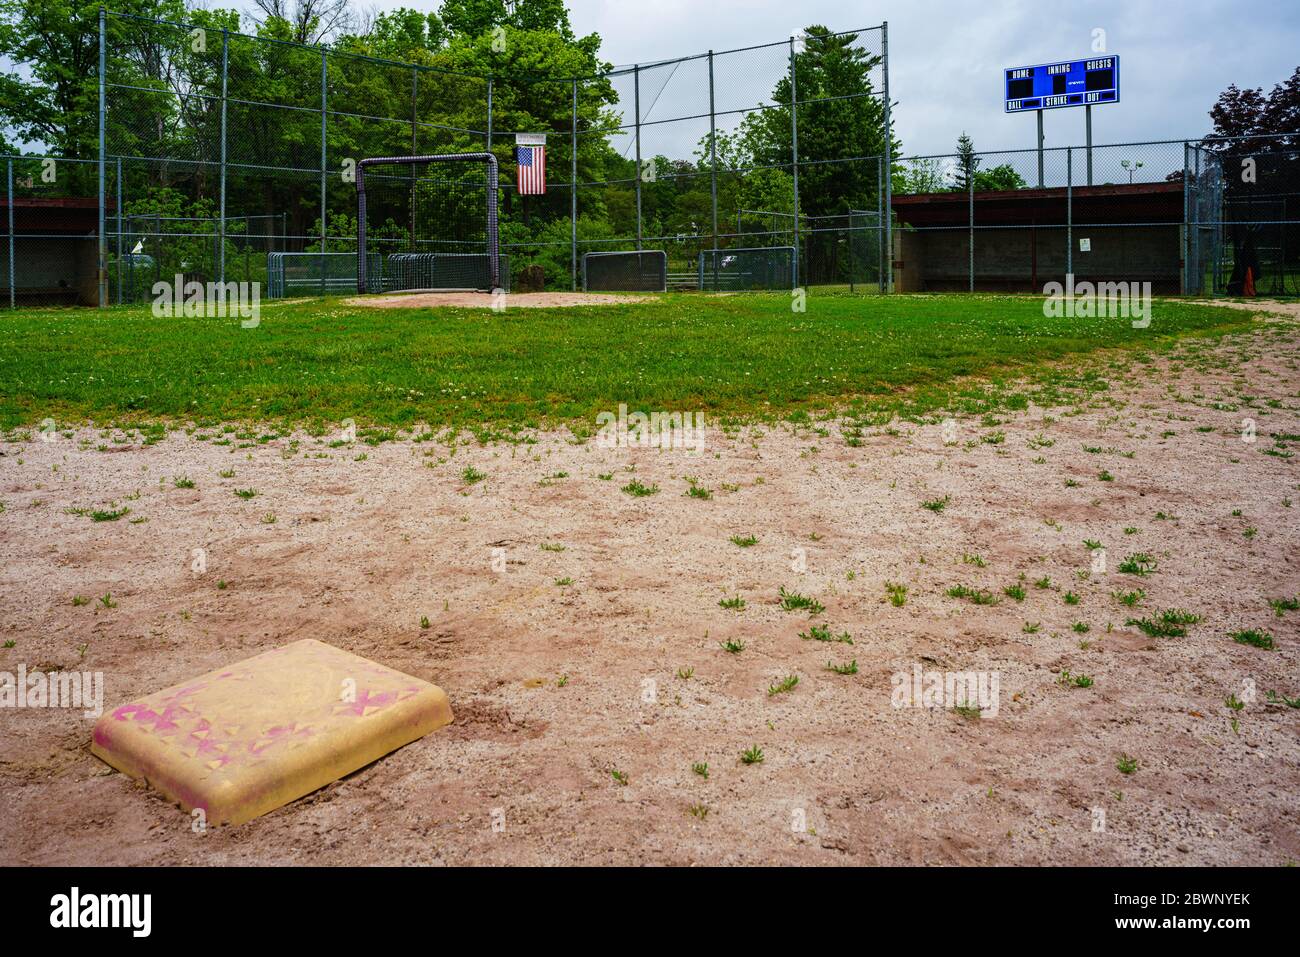 David L. Feldman Memorial Field, a baseball field in Mt. Kisco, NY remains closed due to the continued need for social distancing. Stock Photo